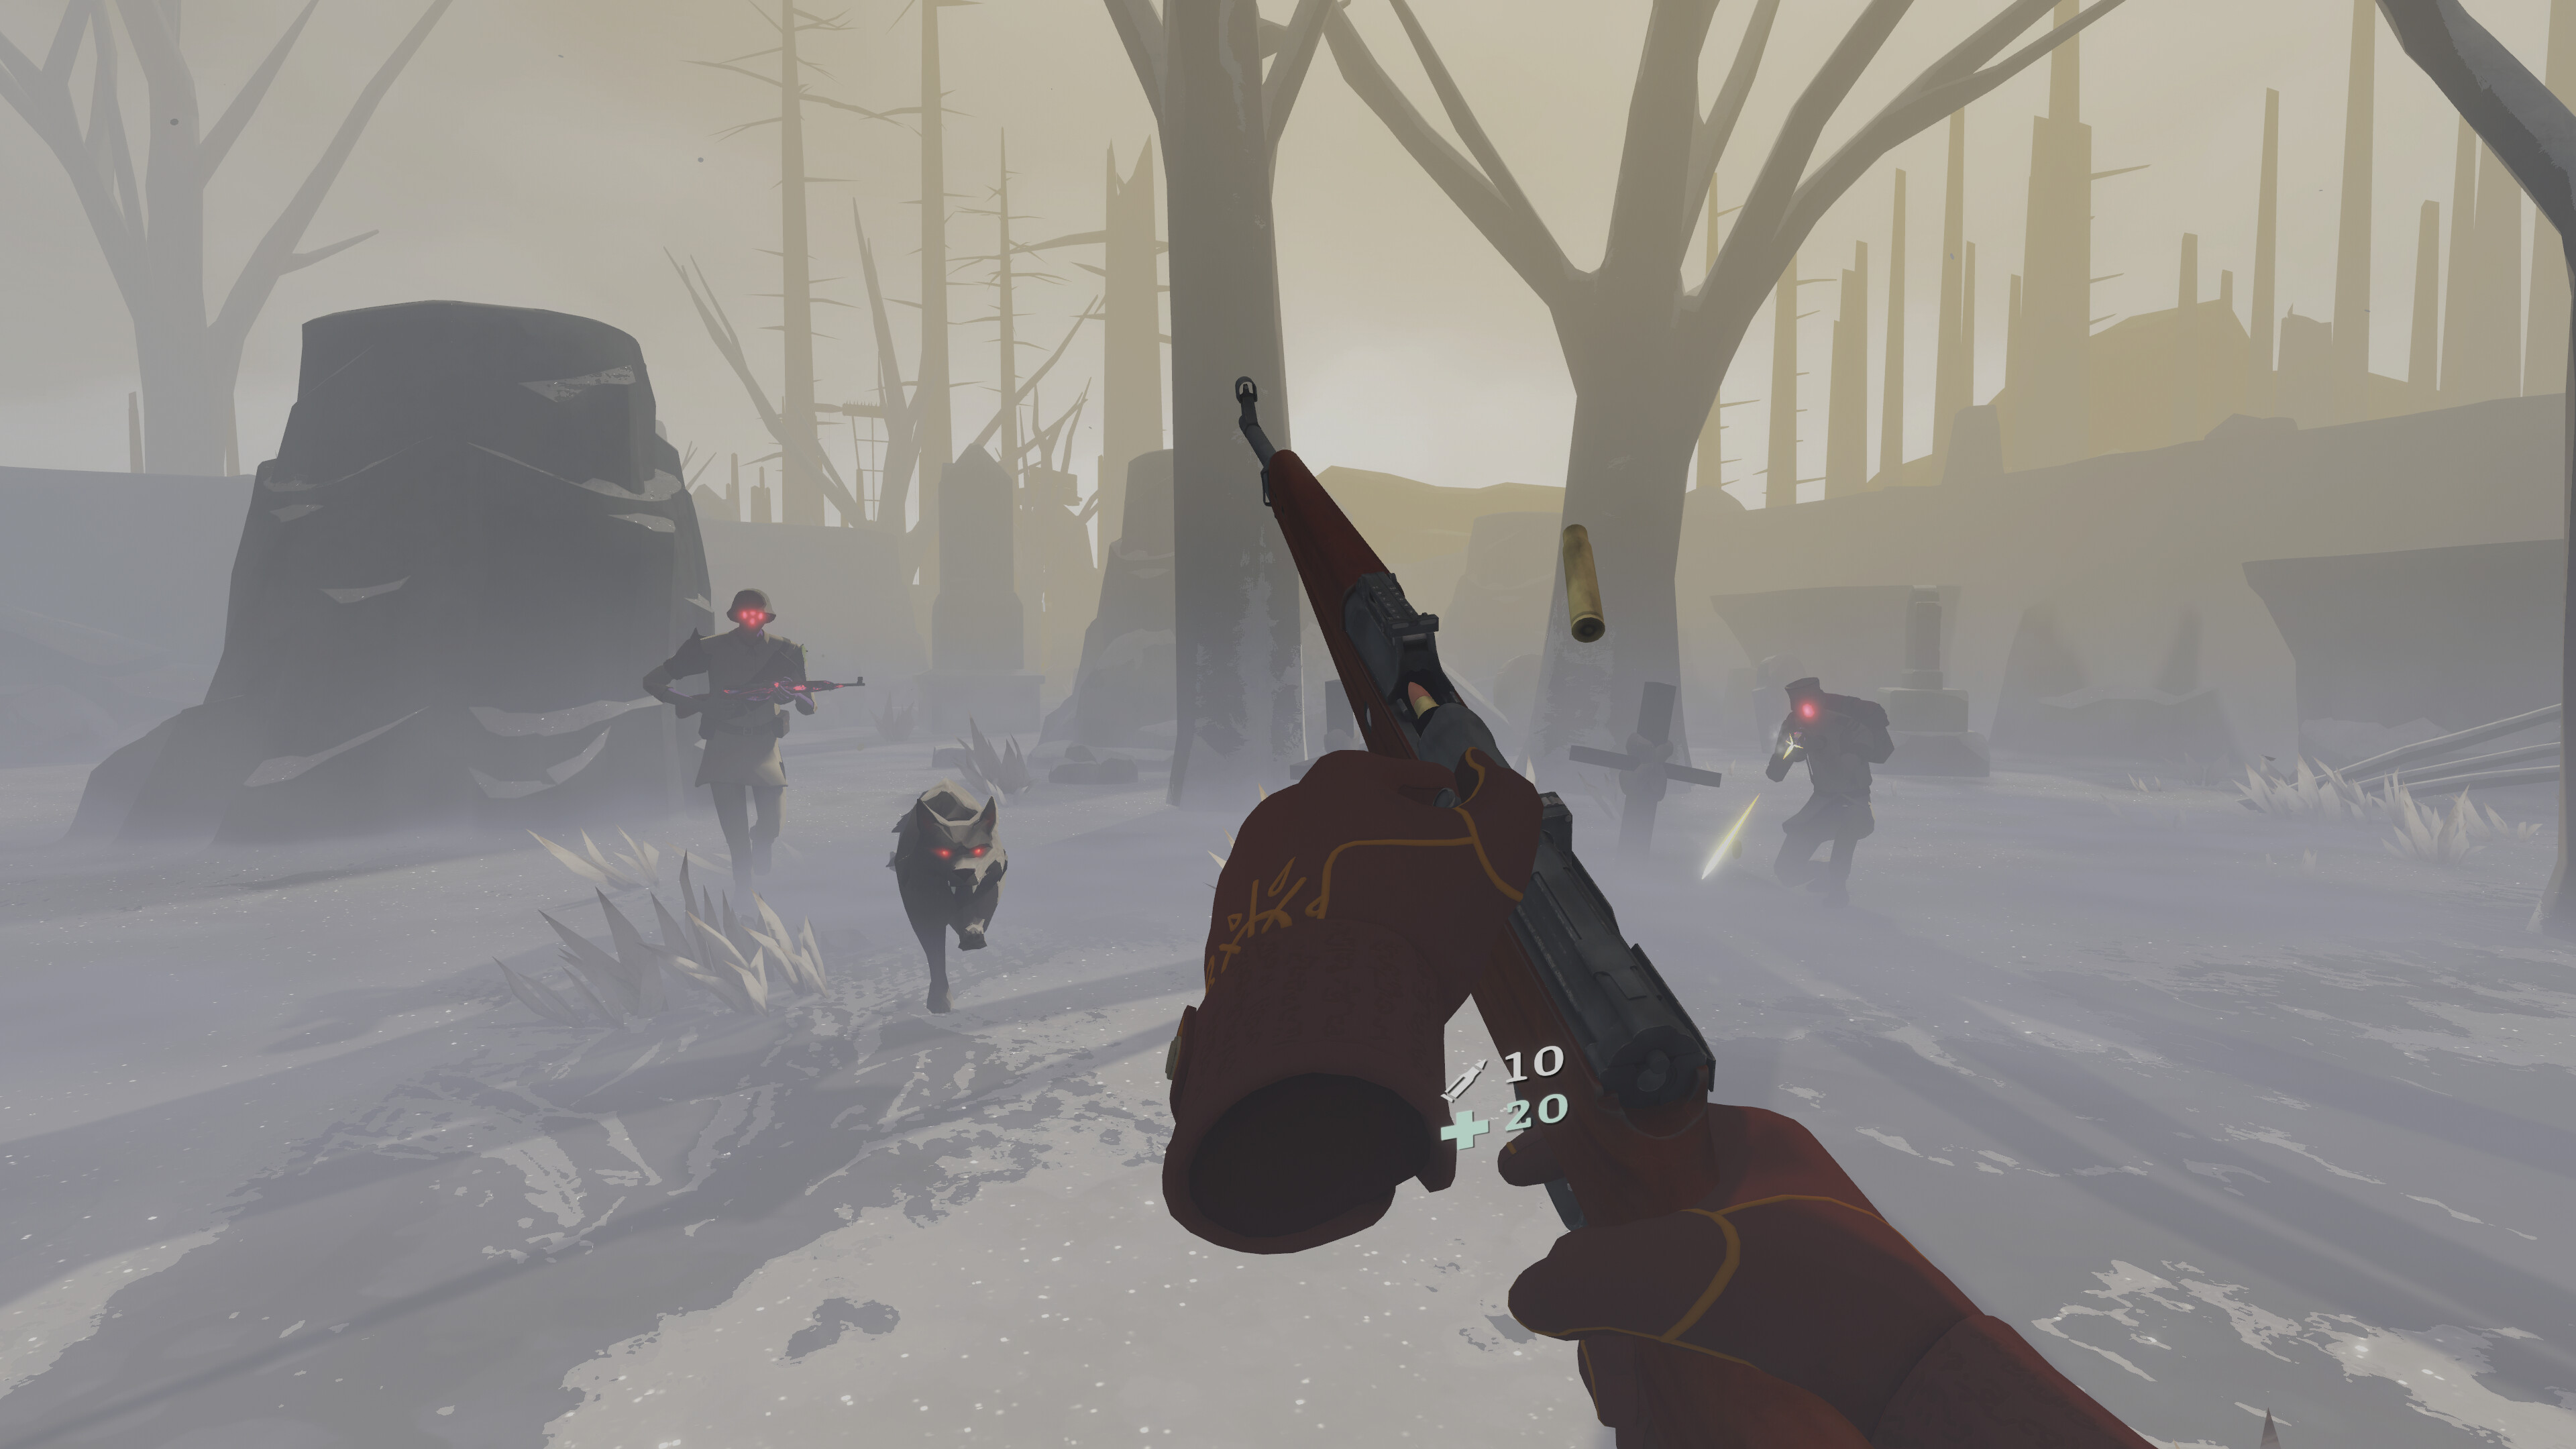 The Light Brigade Free Download for PC